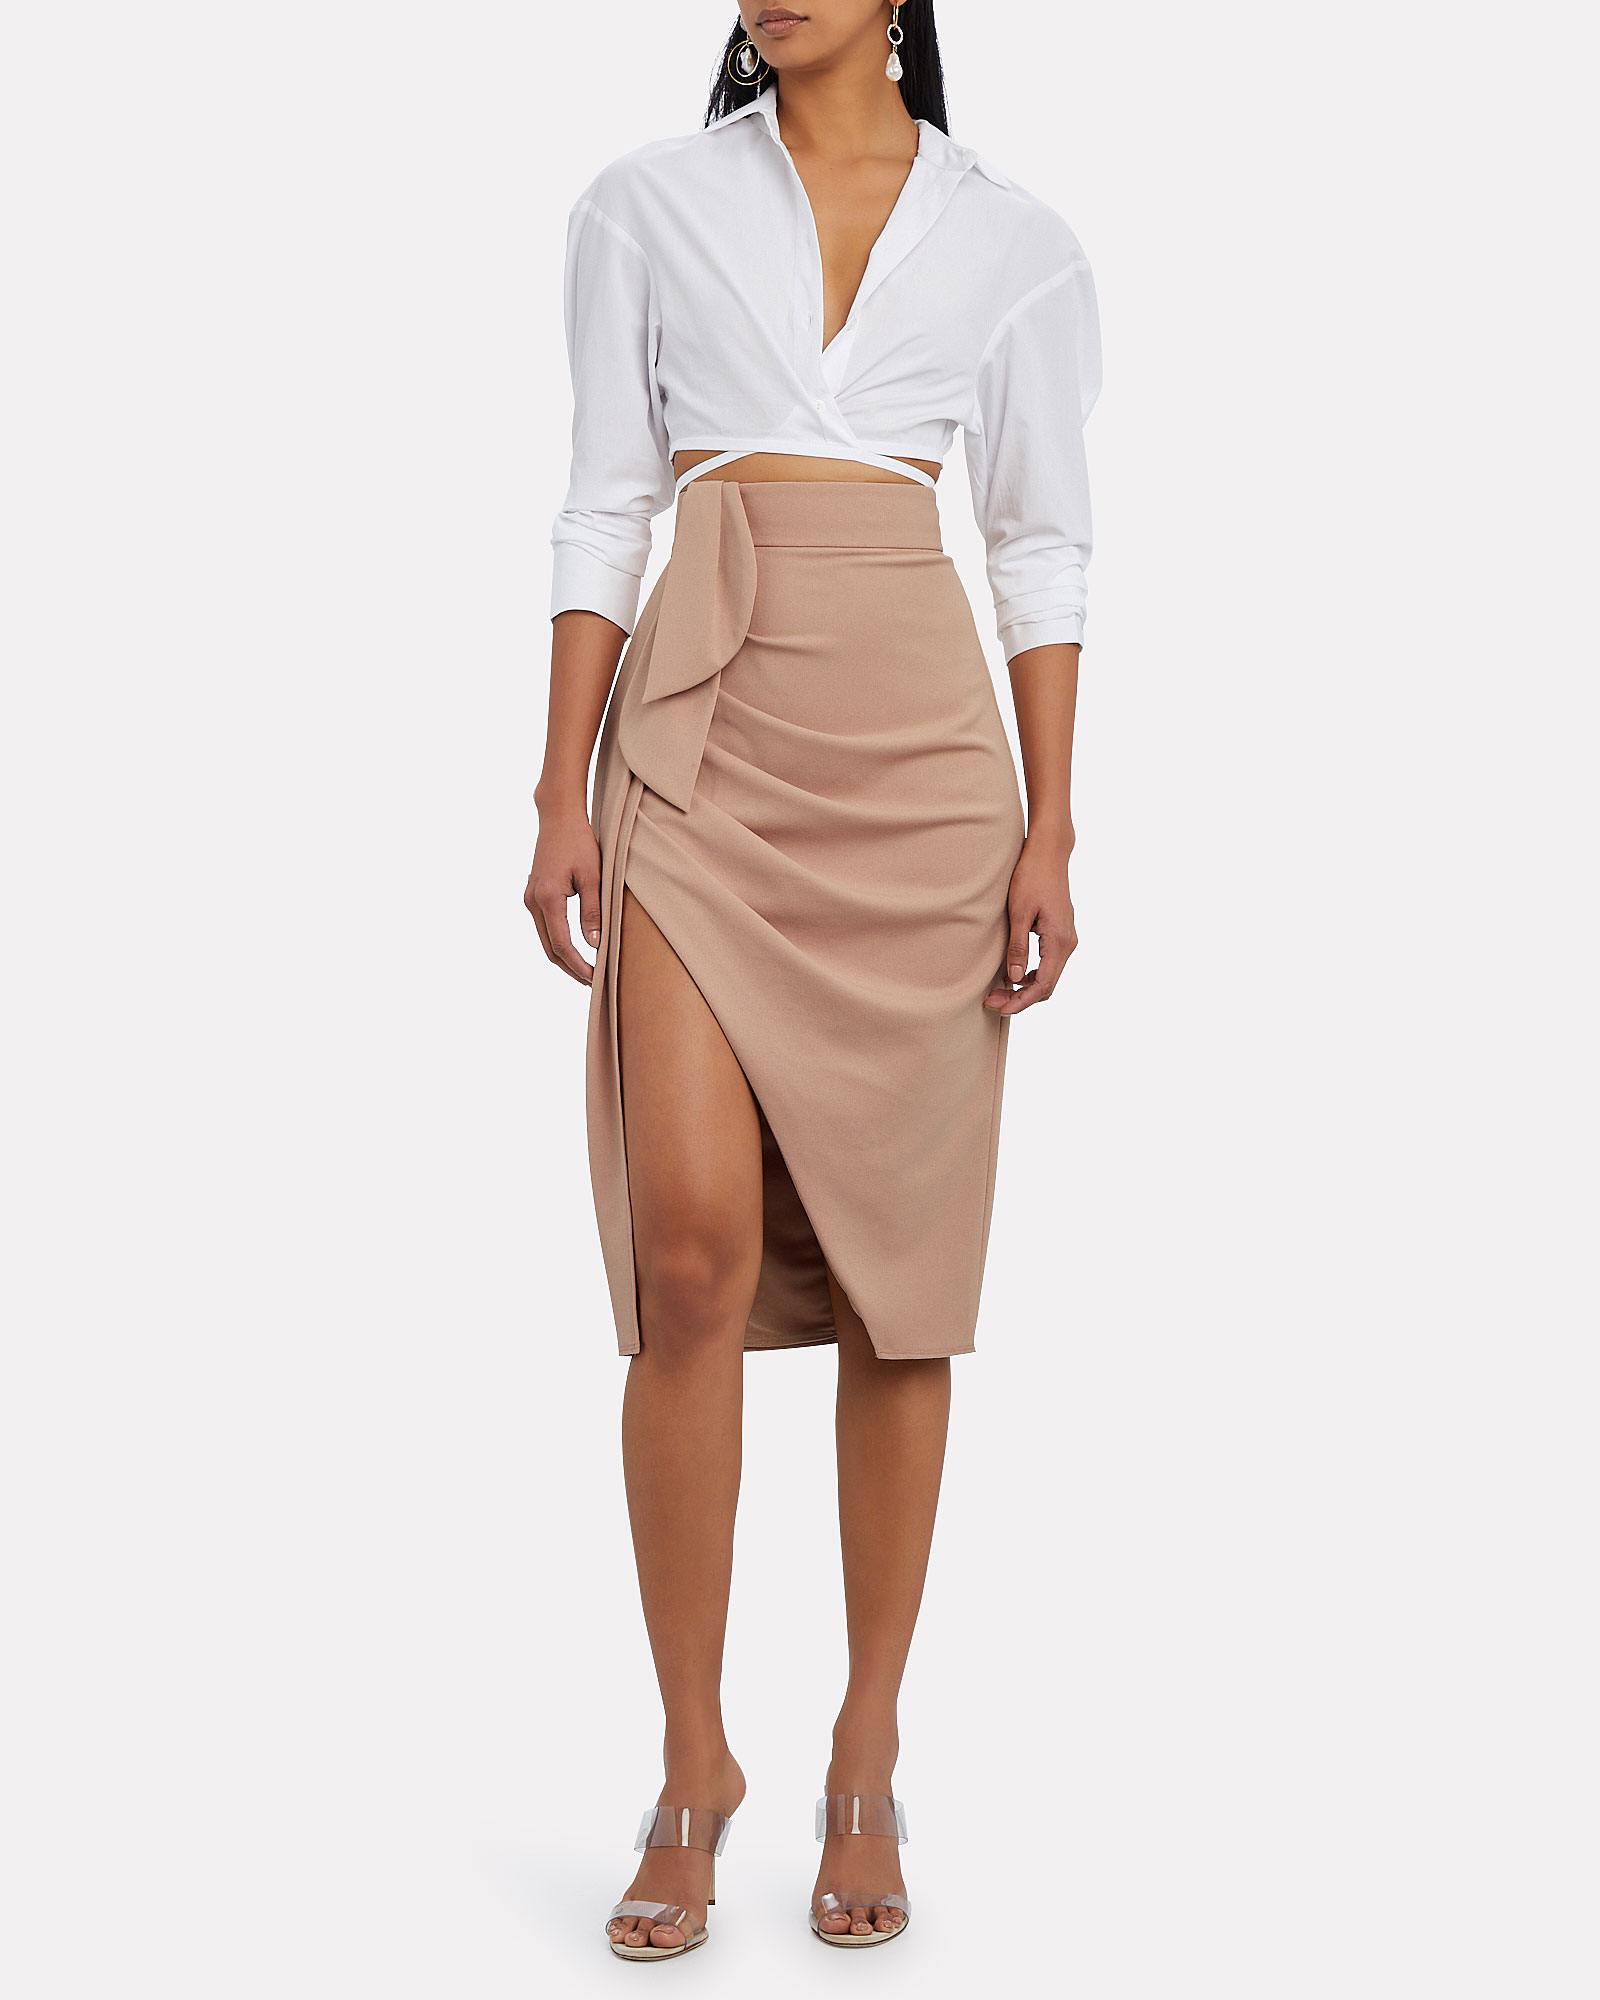 Katie May Mamma Mia Ruched Crepe Skirt | INTERMIX®